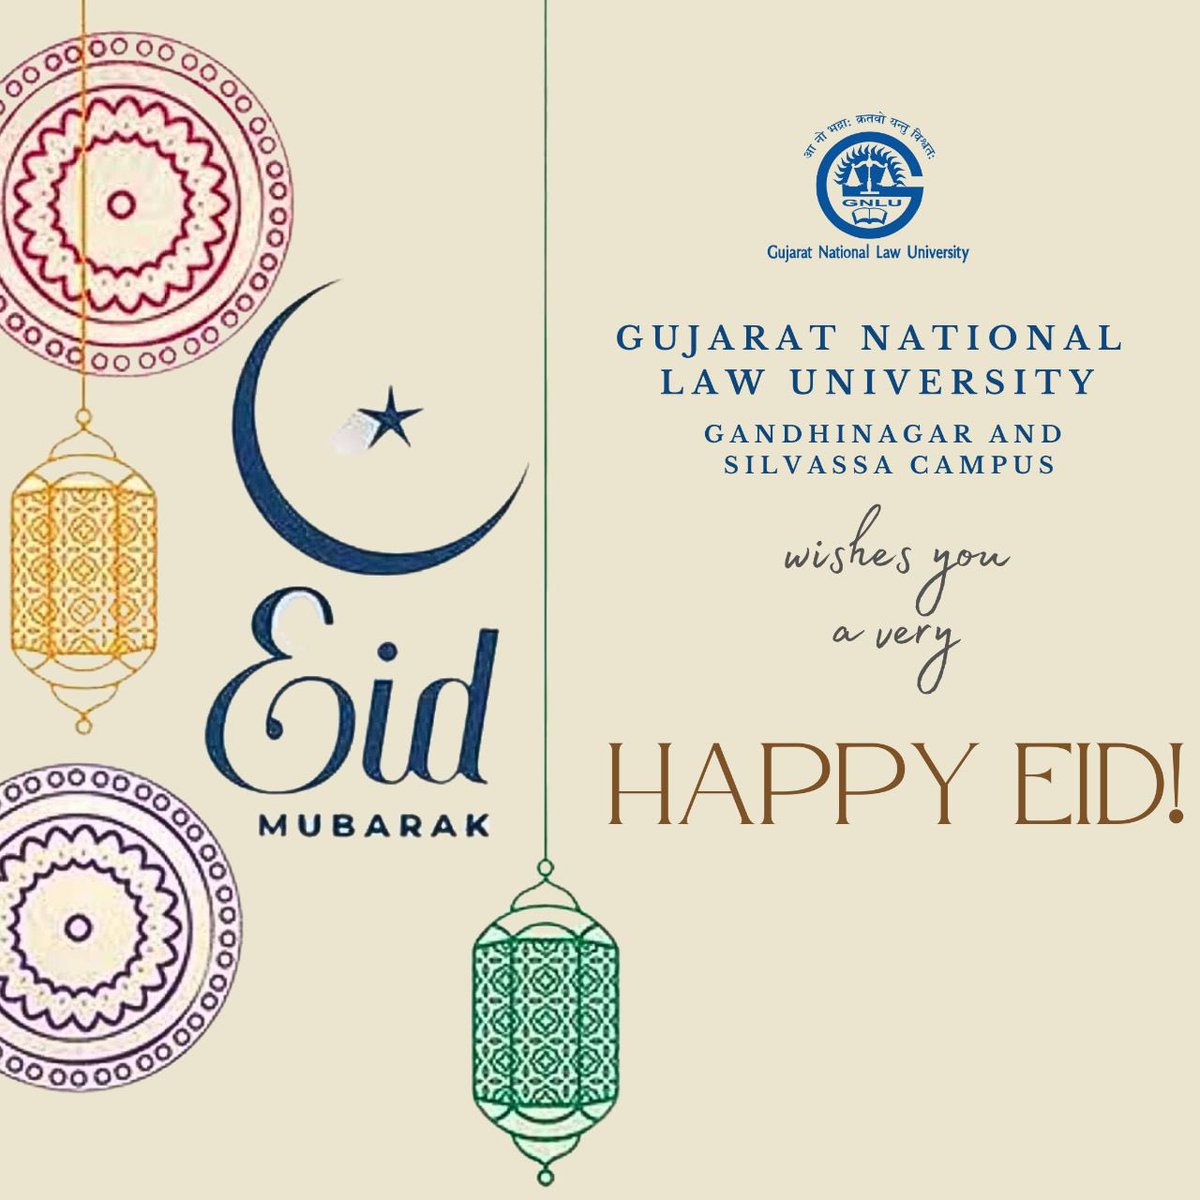 On this auspicious occasion of Eid, let's pay gratitude to the divine light for all the wonderful things in our lives. GNLU wishes you a Happy Eid Mubarak!